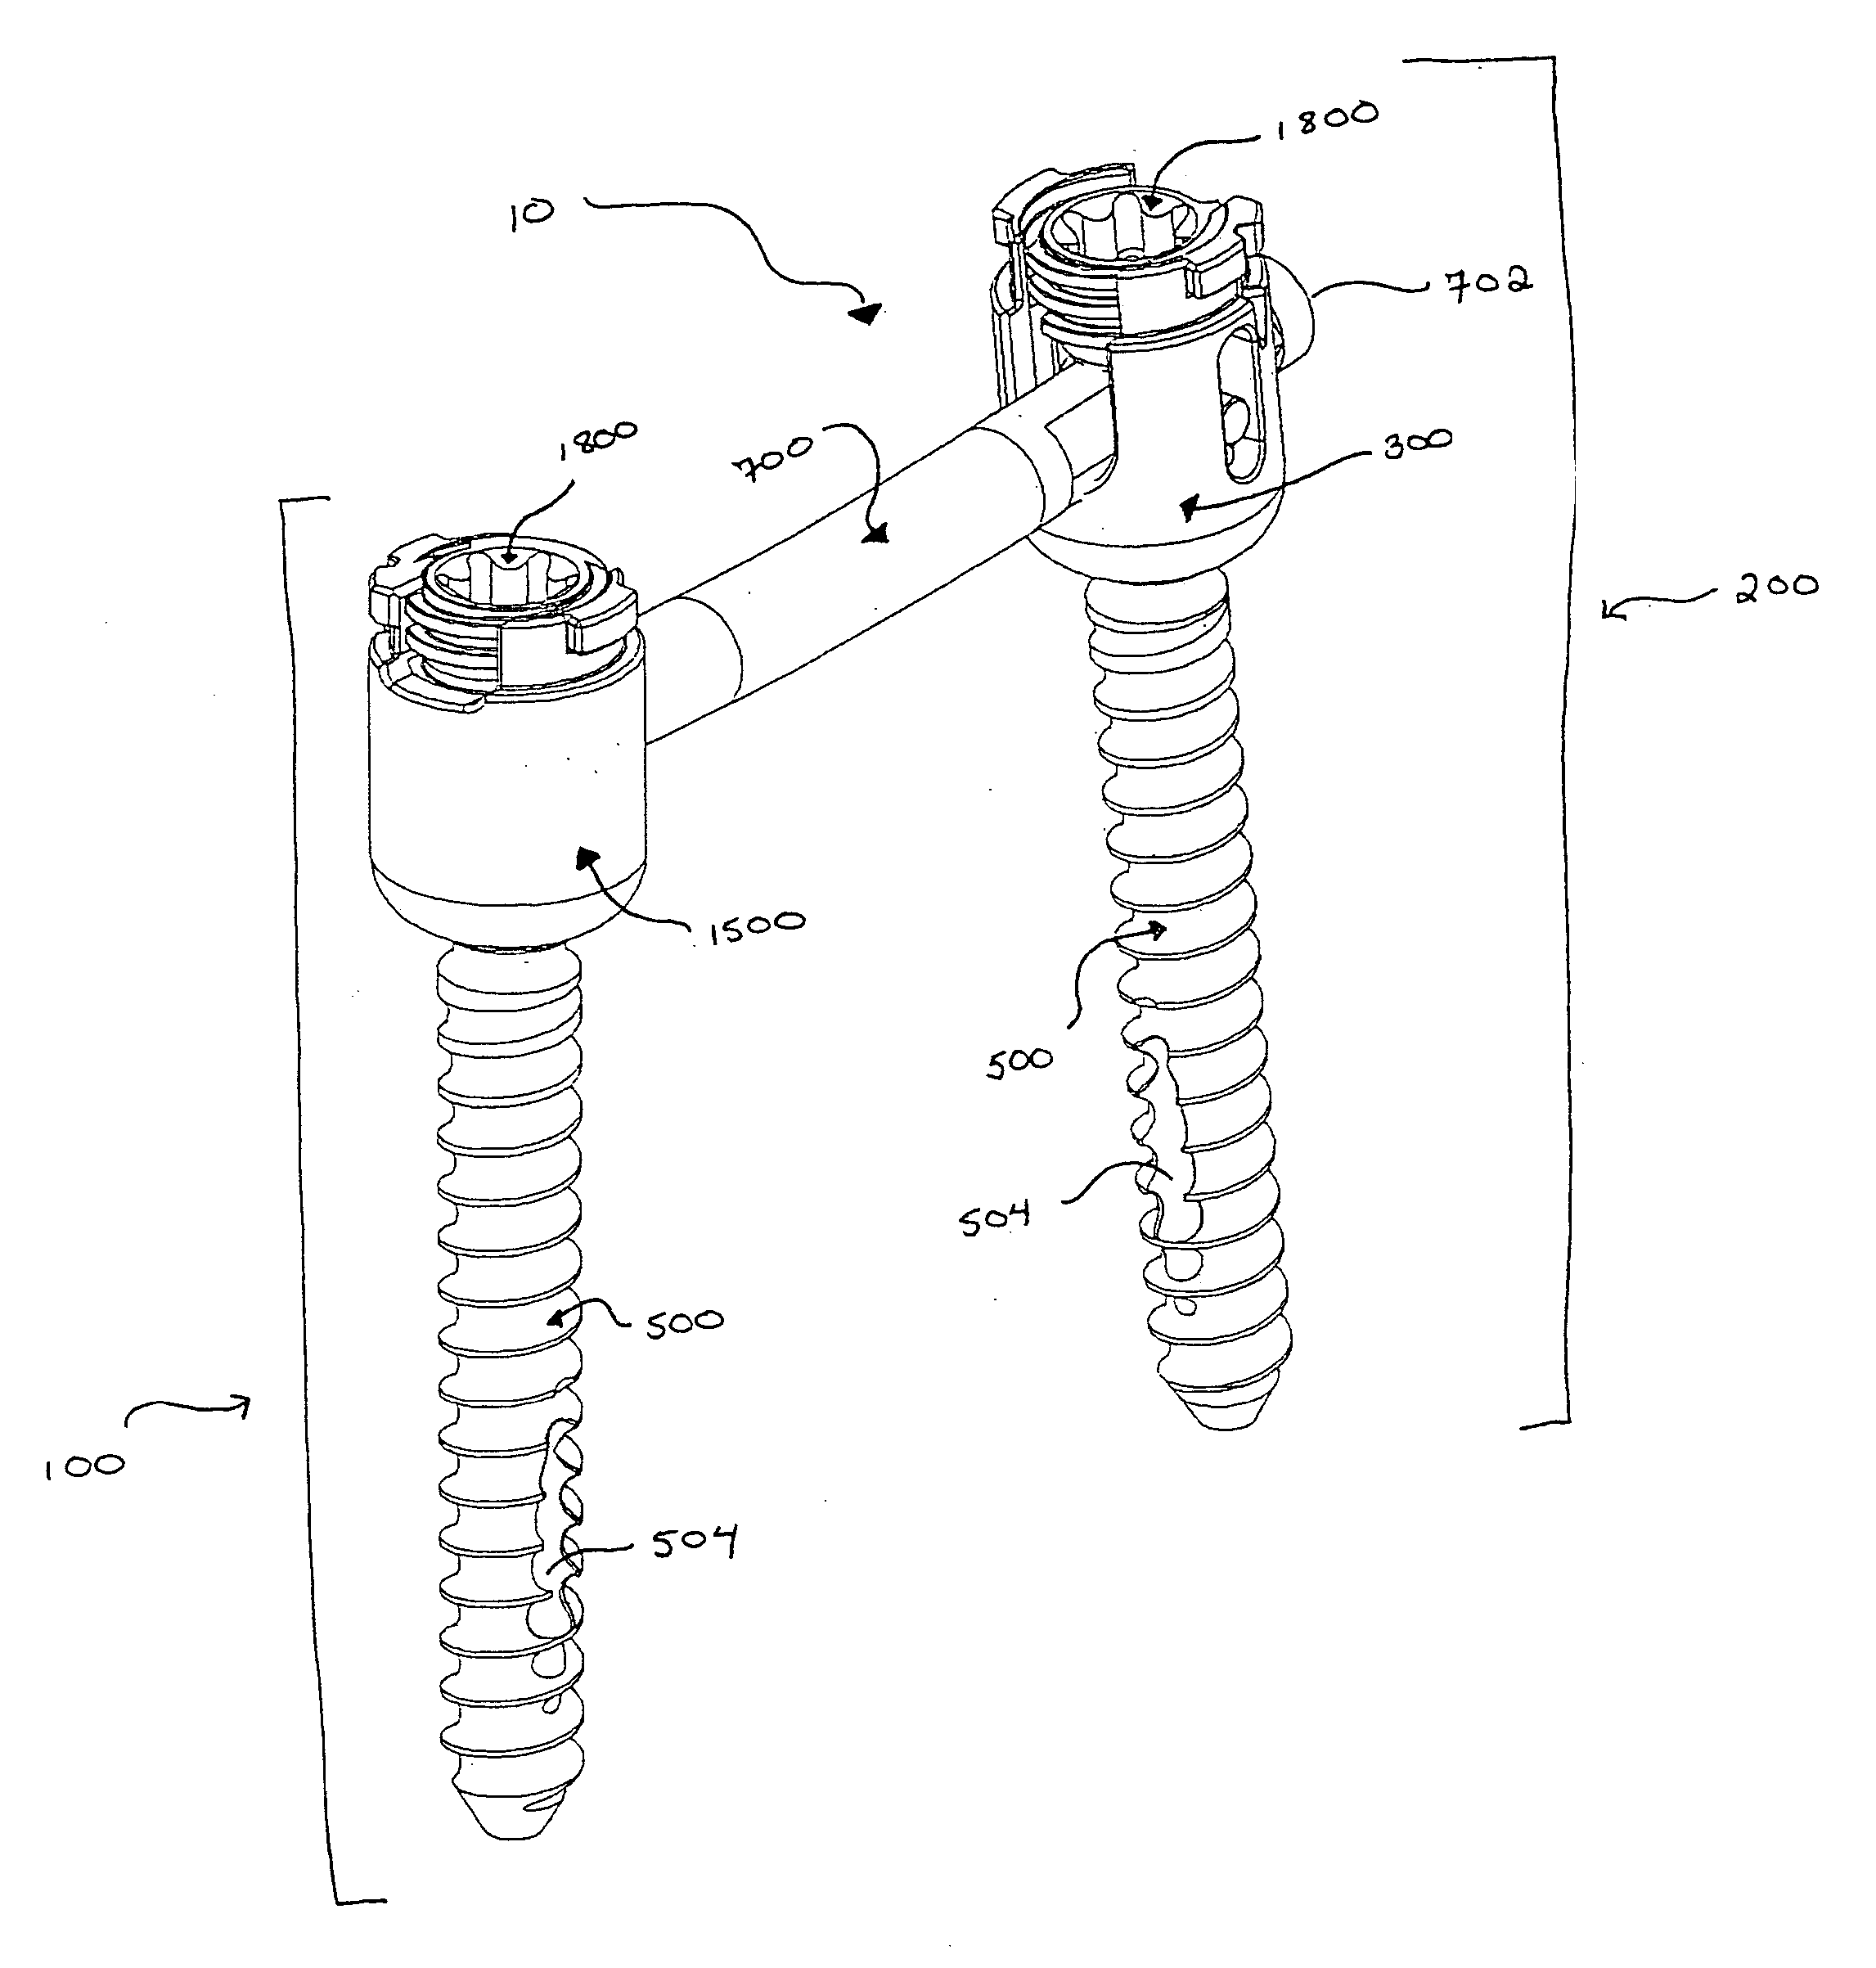 Internal structure stabilization system for spanning three or more structures